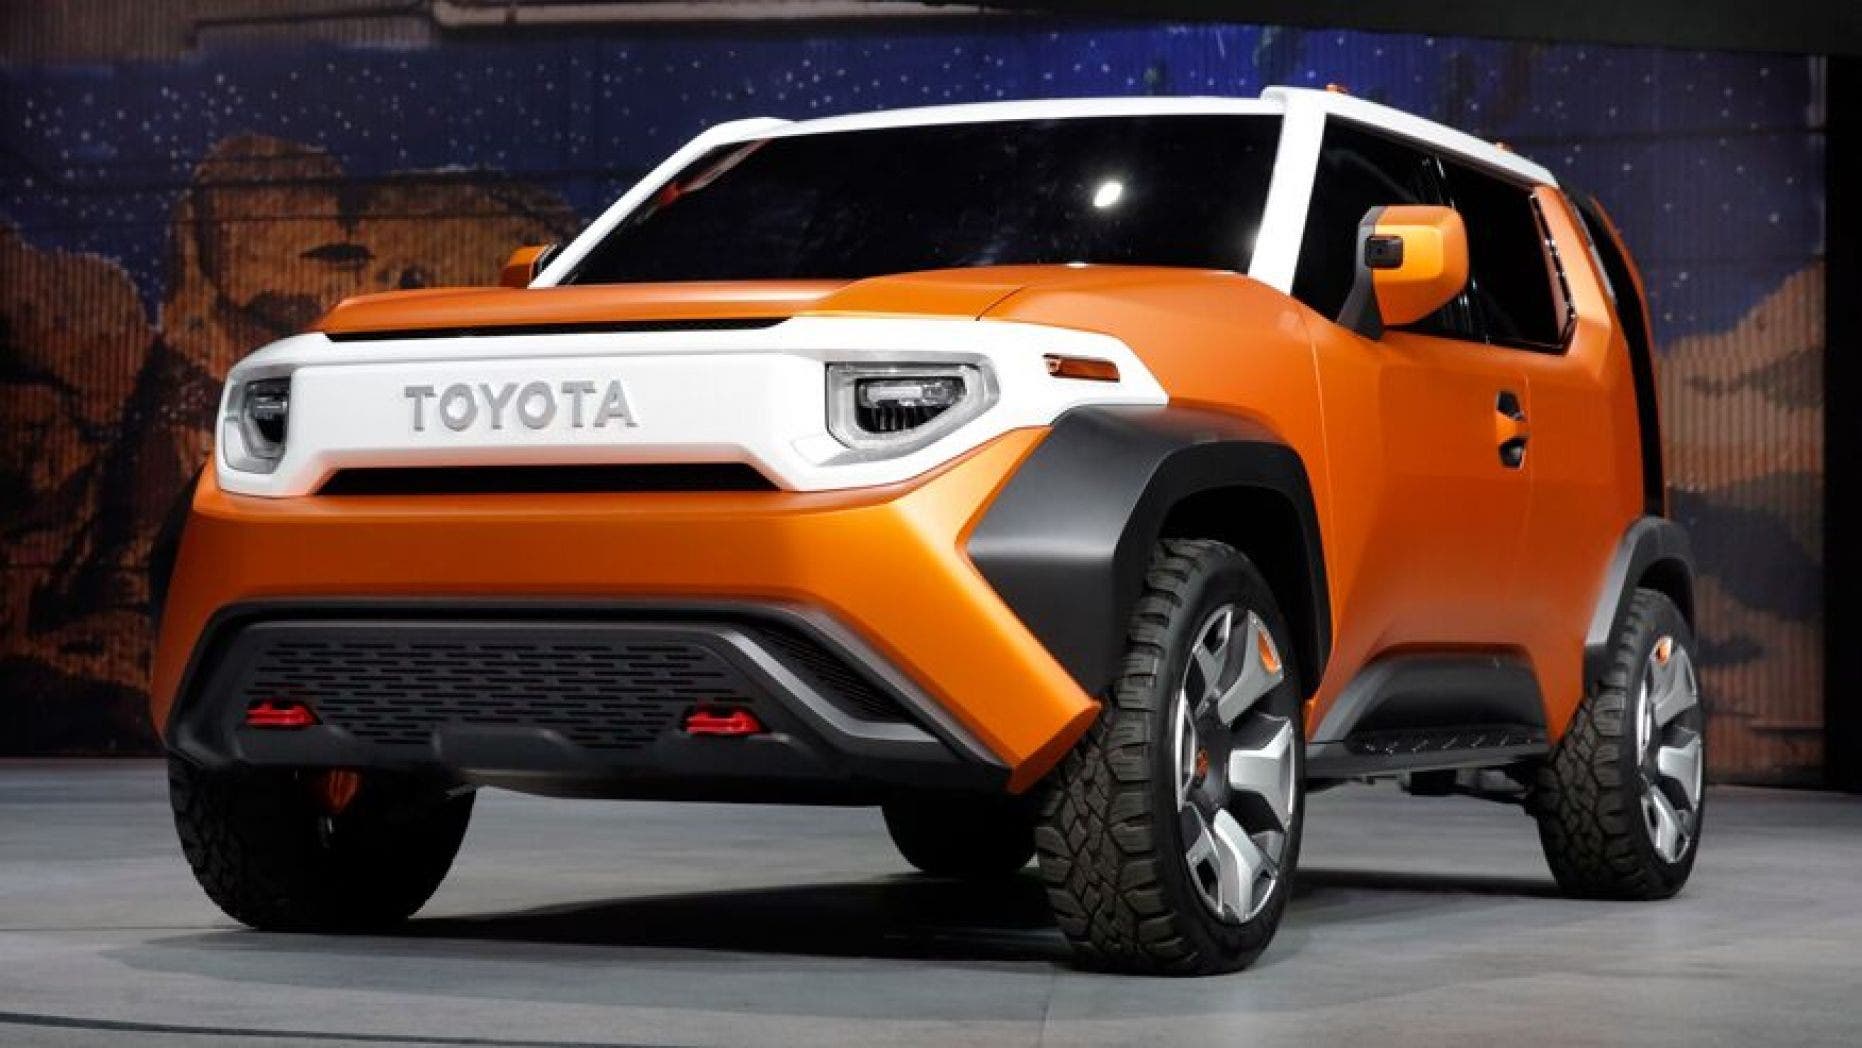 Toyota Suv Models Everything You Need To Know Toyota Suv Models My